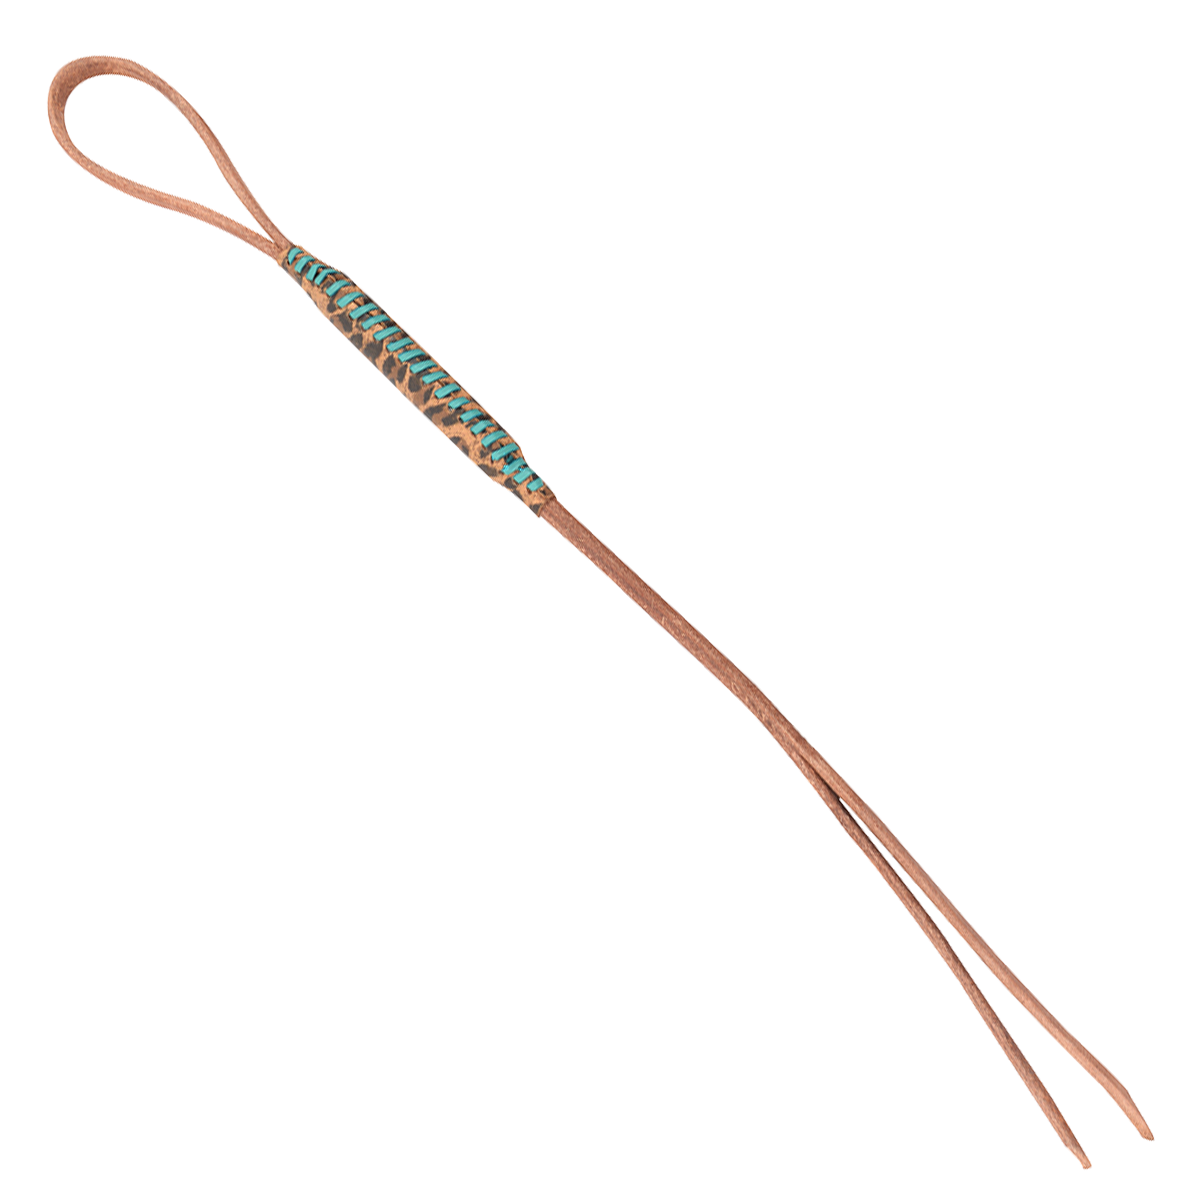 Martin saddlery Leather Quirt - Turquoise Lacing